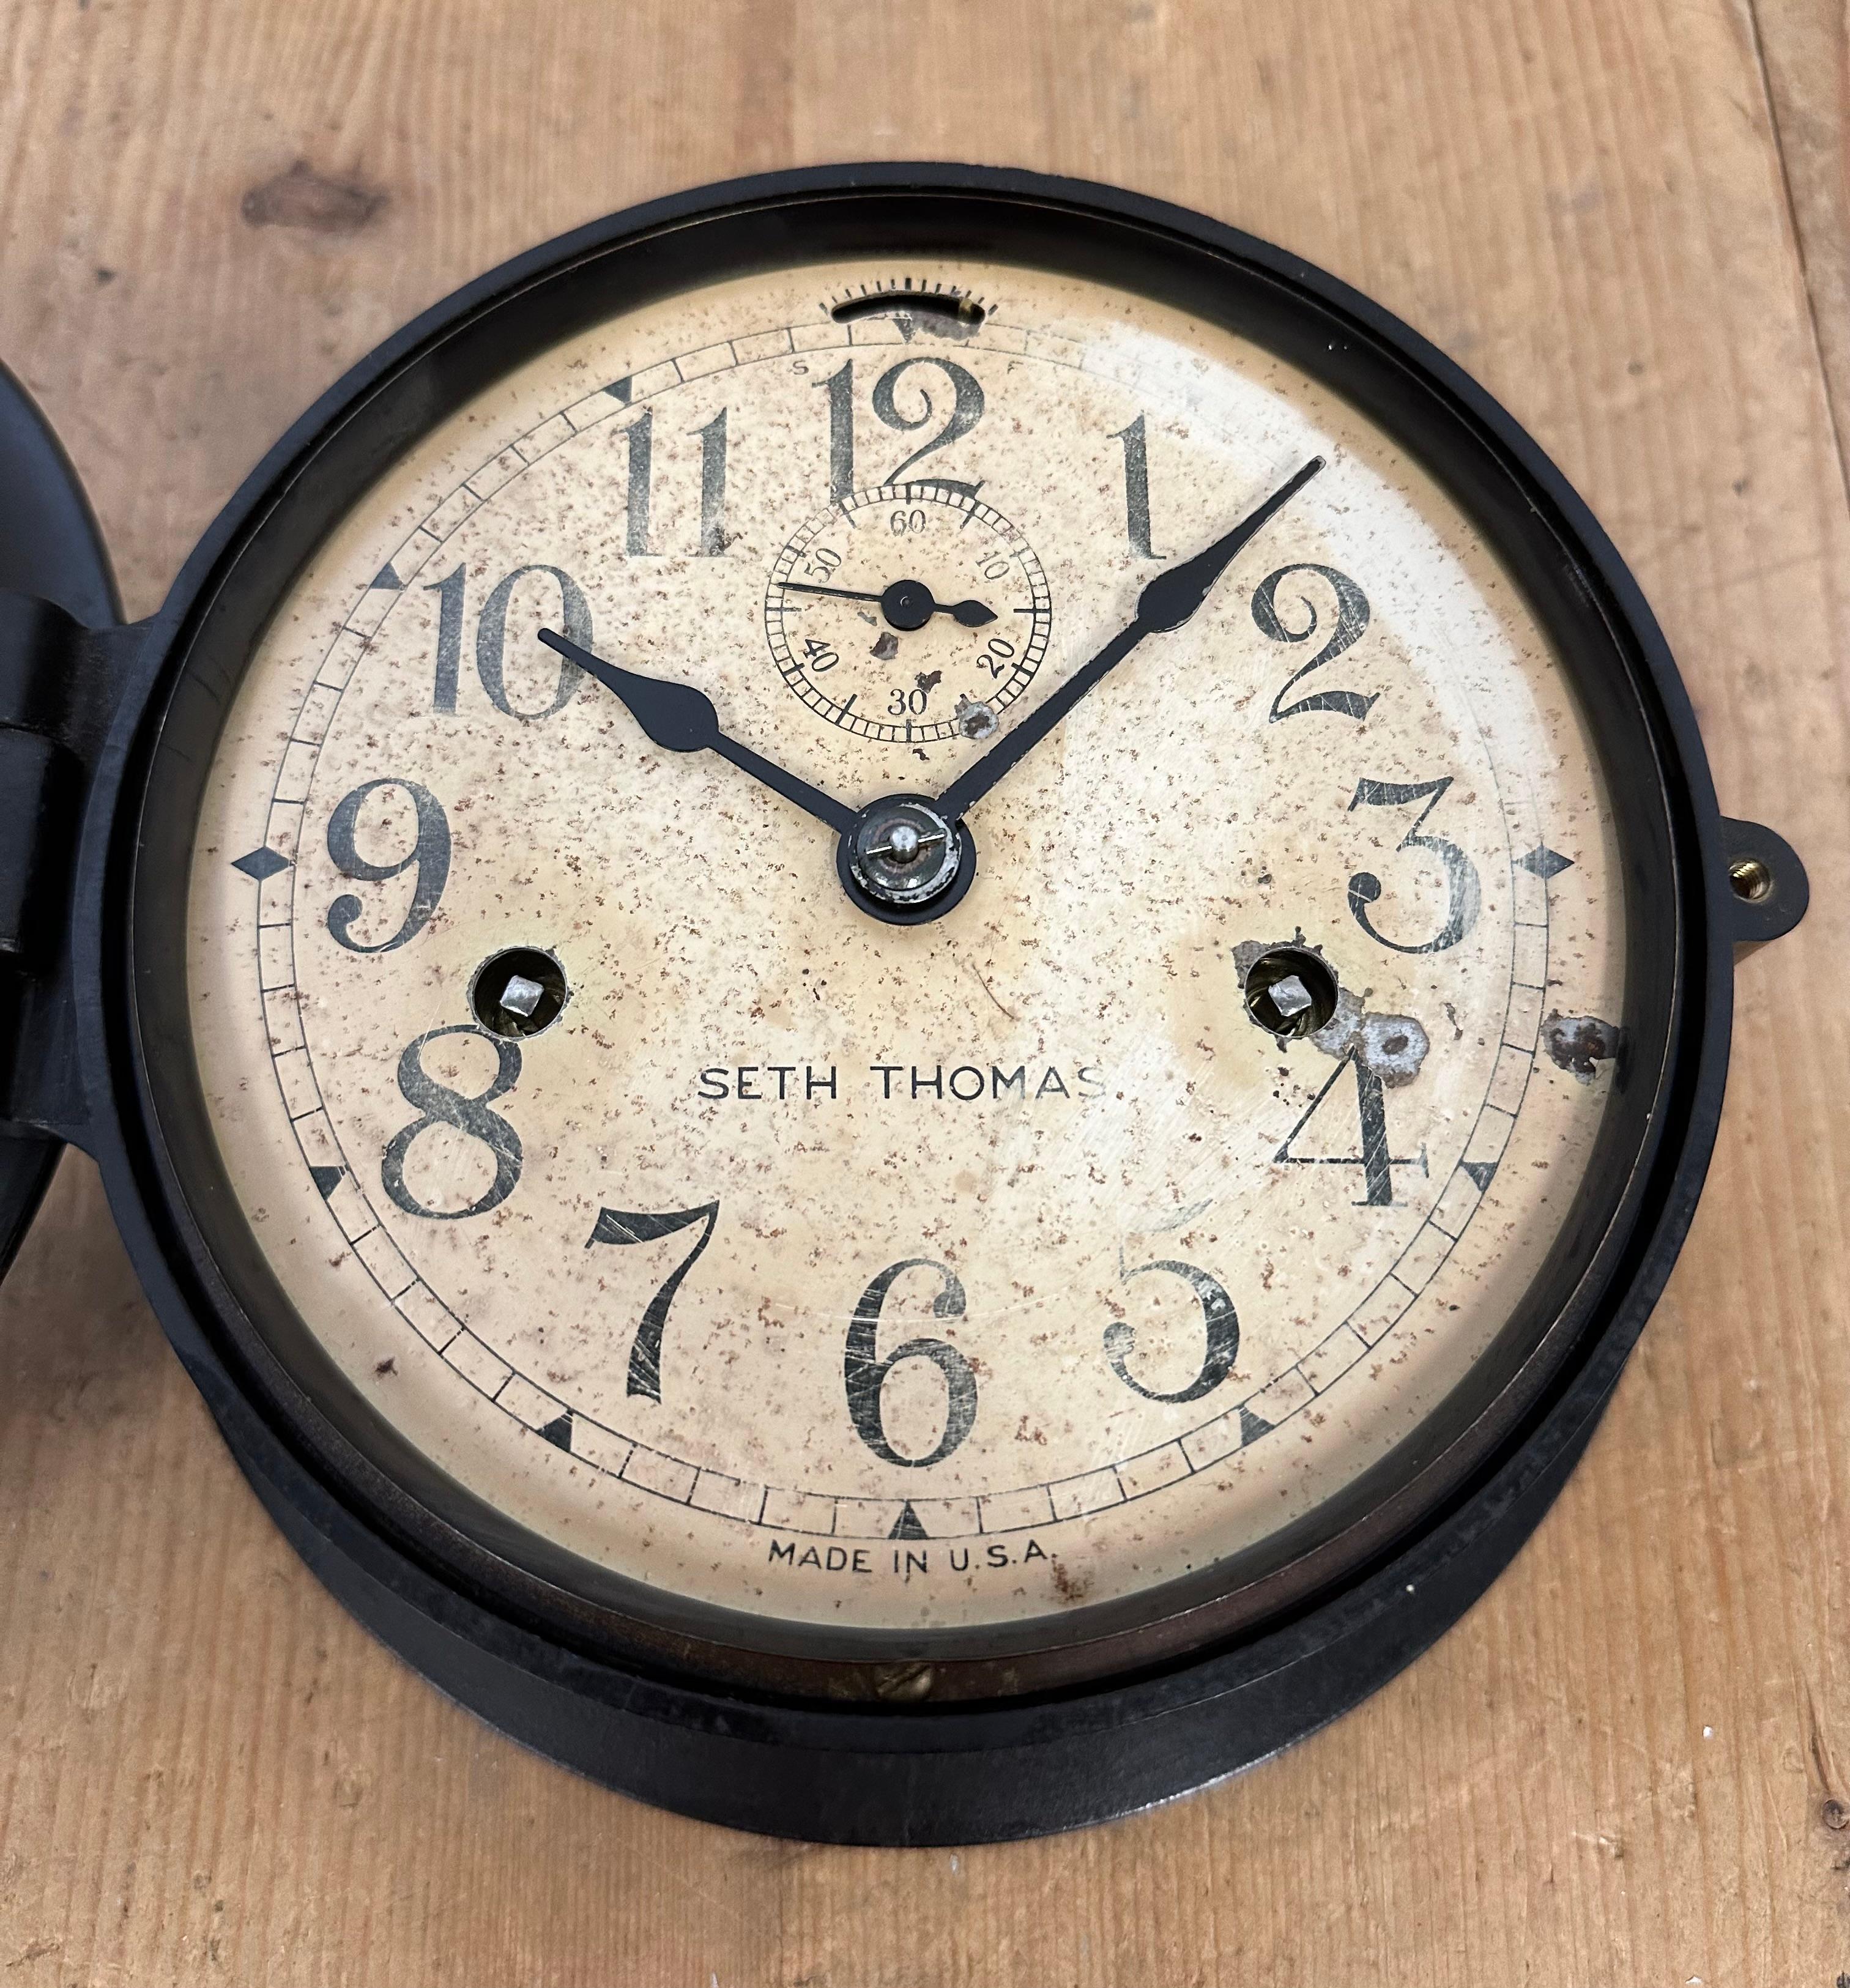  Vintage Mechanical Bakelite Maritime Wall Clock from Seth Thomas, 1950s For Sale 7